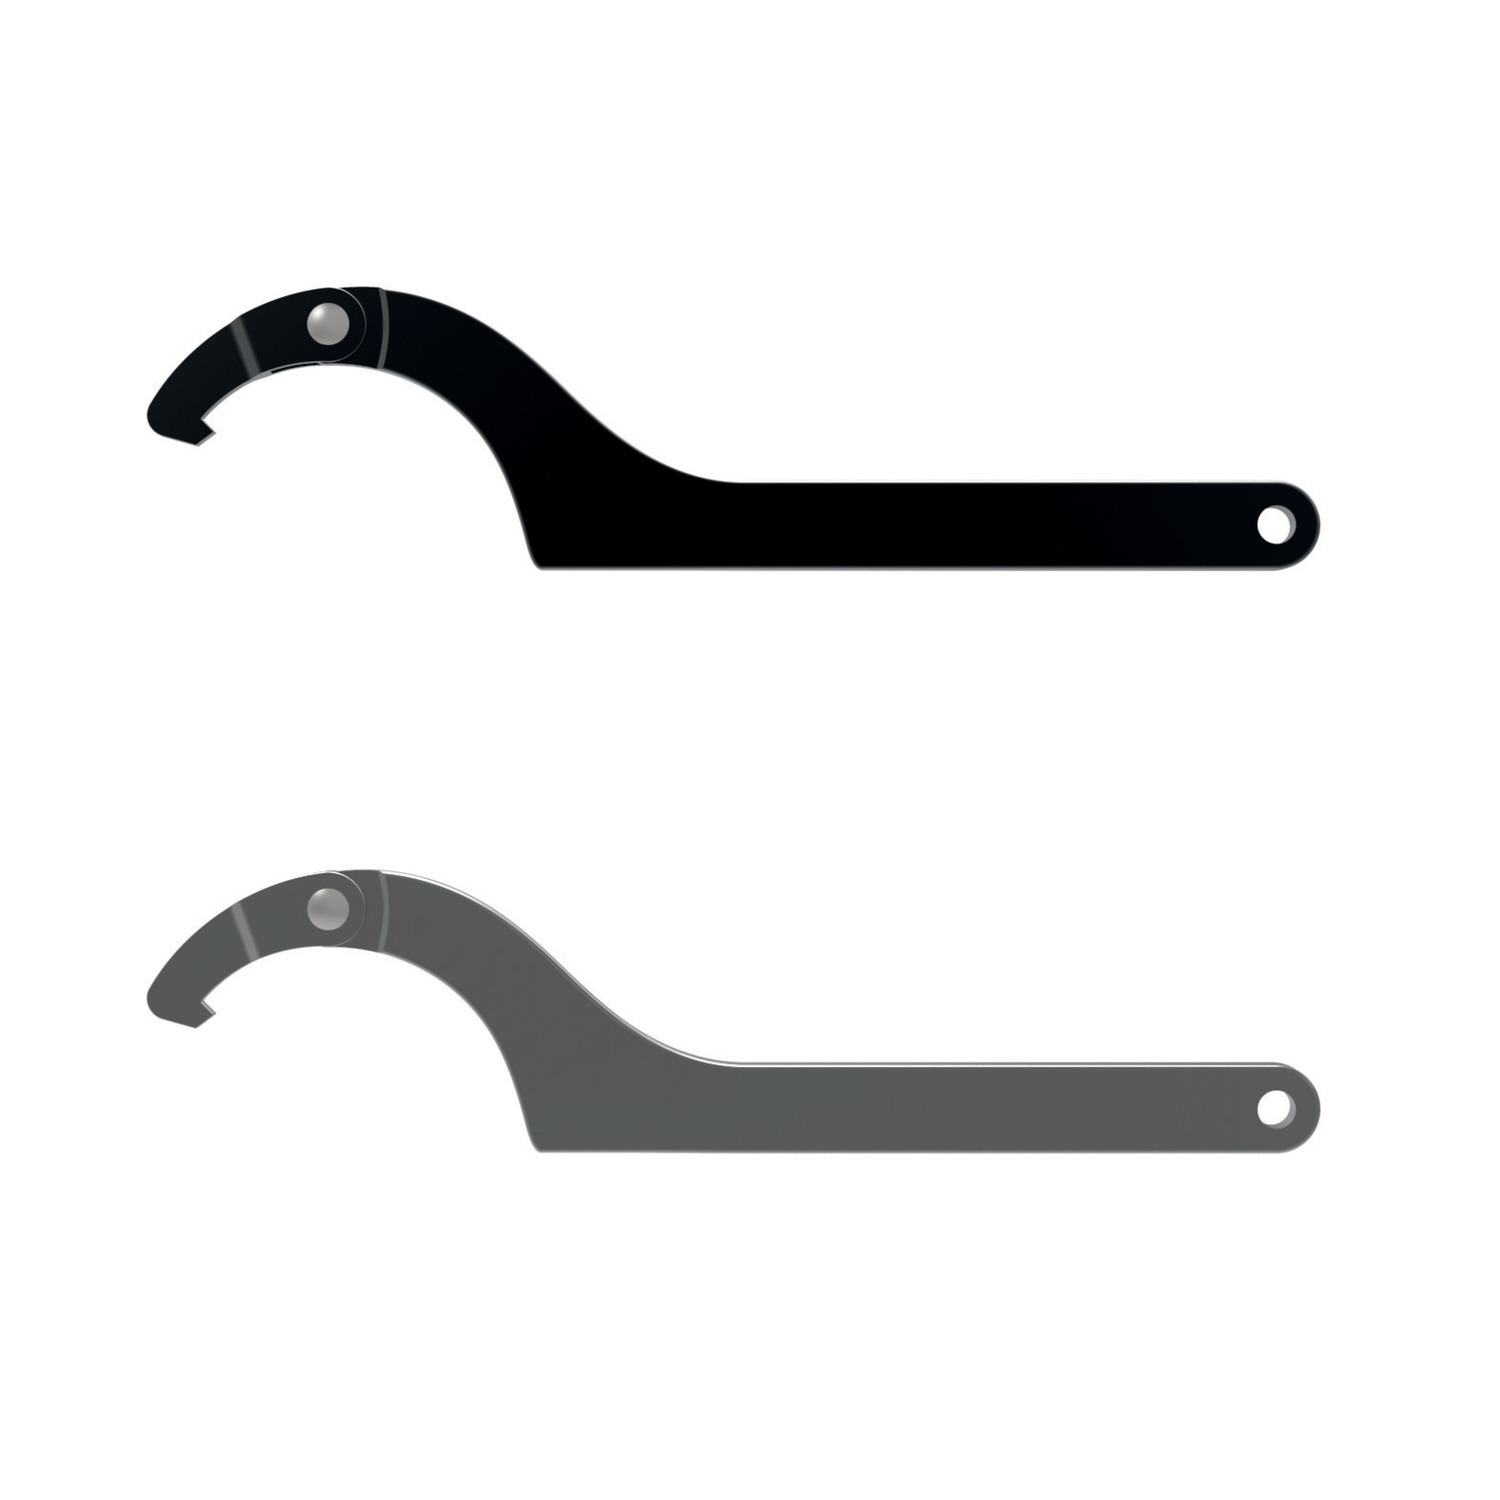 Hook Spanners - with Hook Nose Hinged hook spanner for grooved nuts, sizes available from 20mm to 230mm short design.